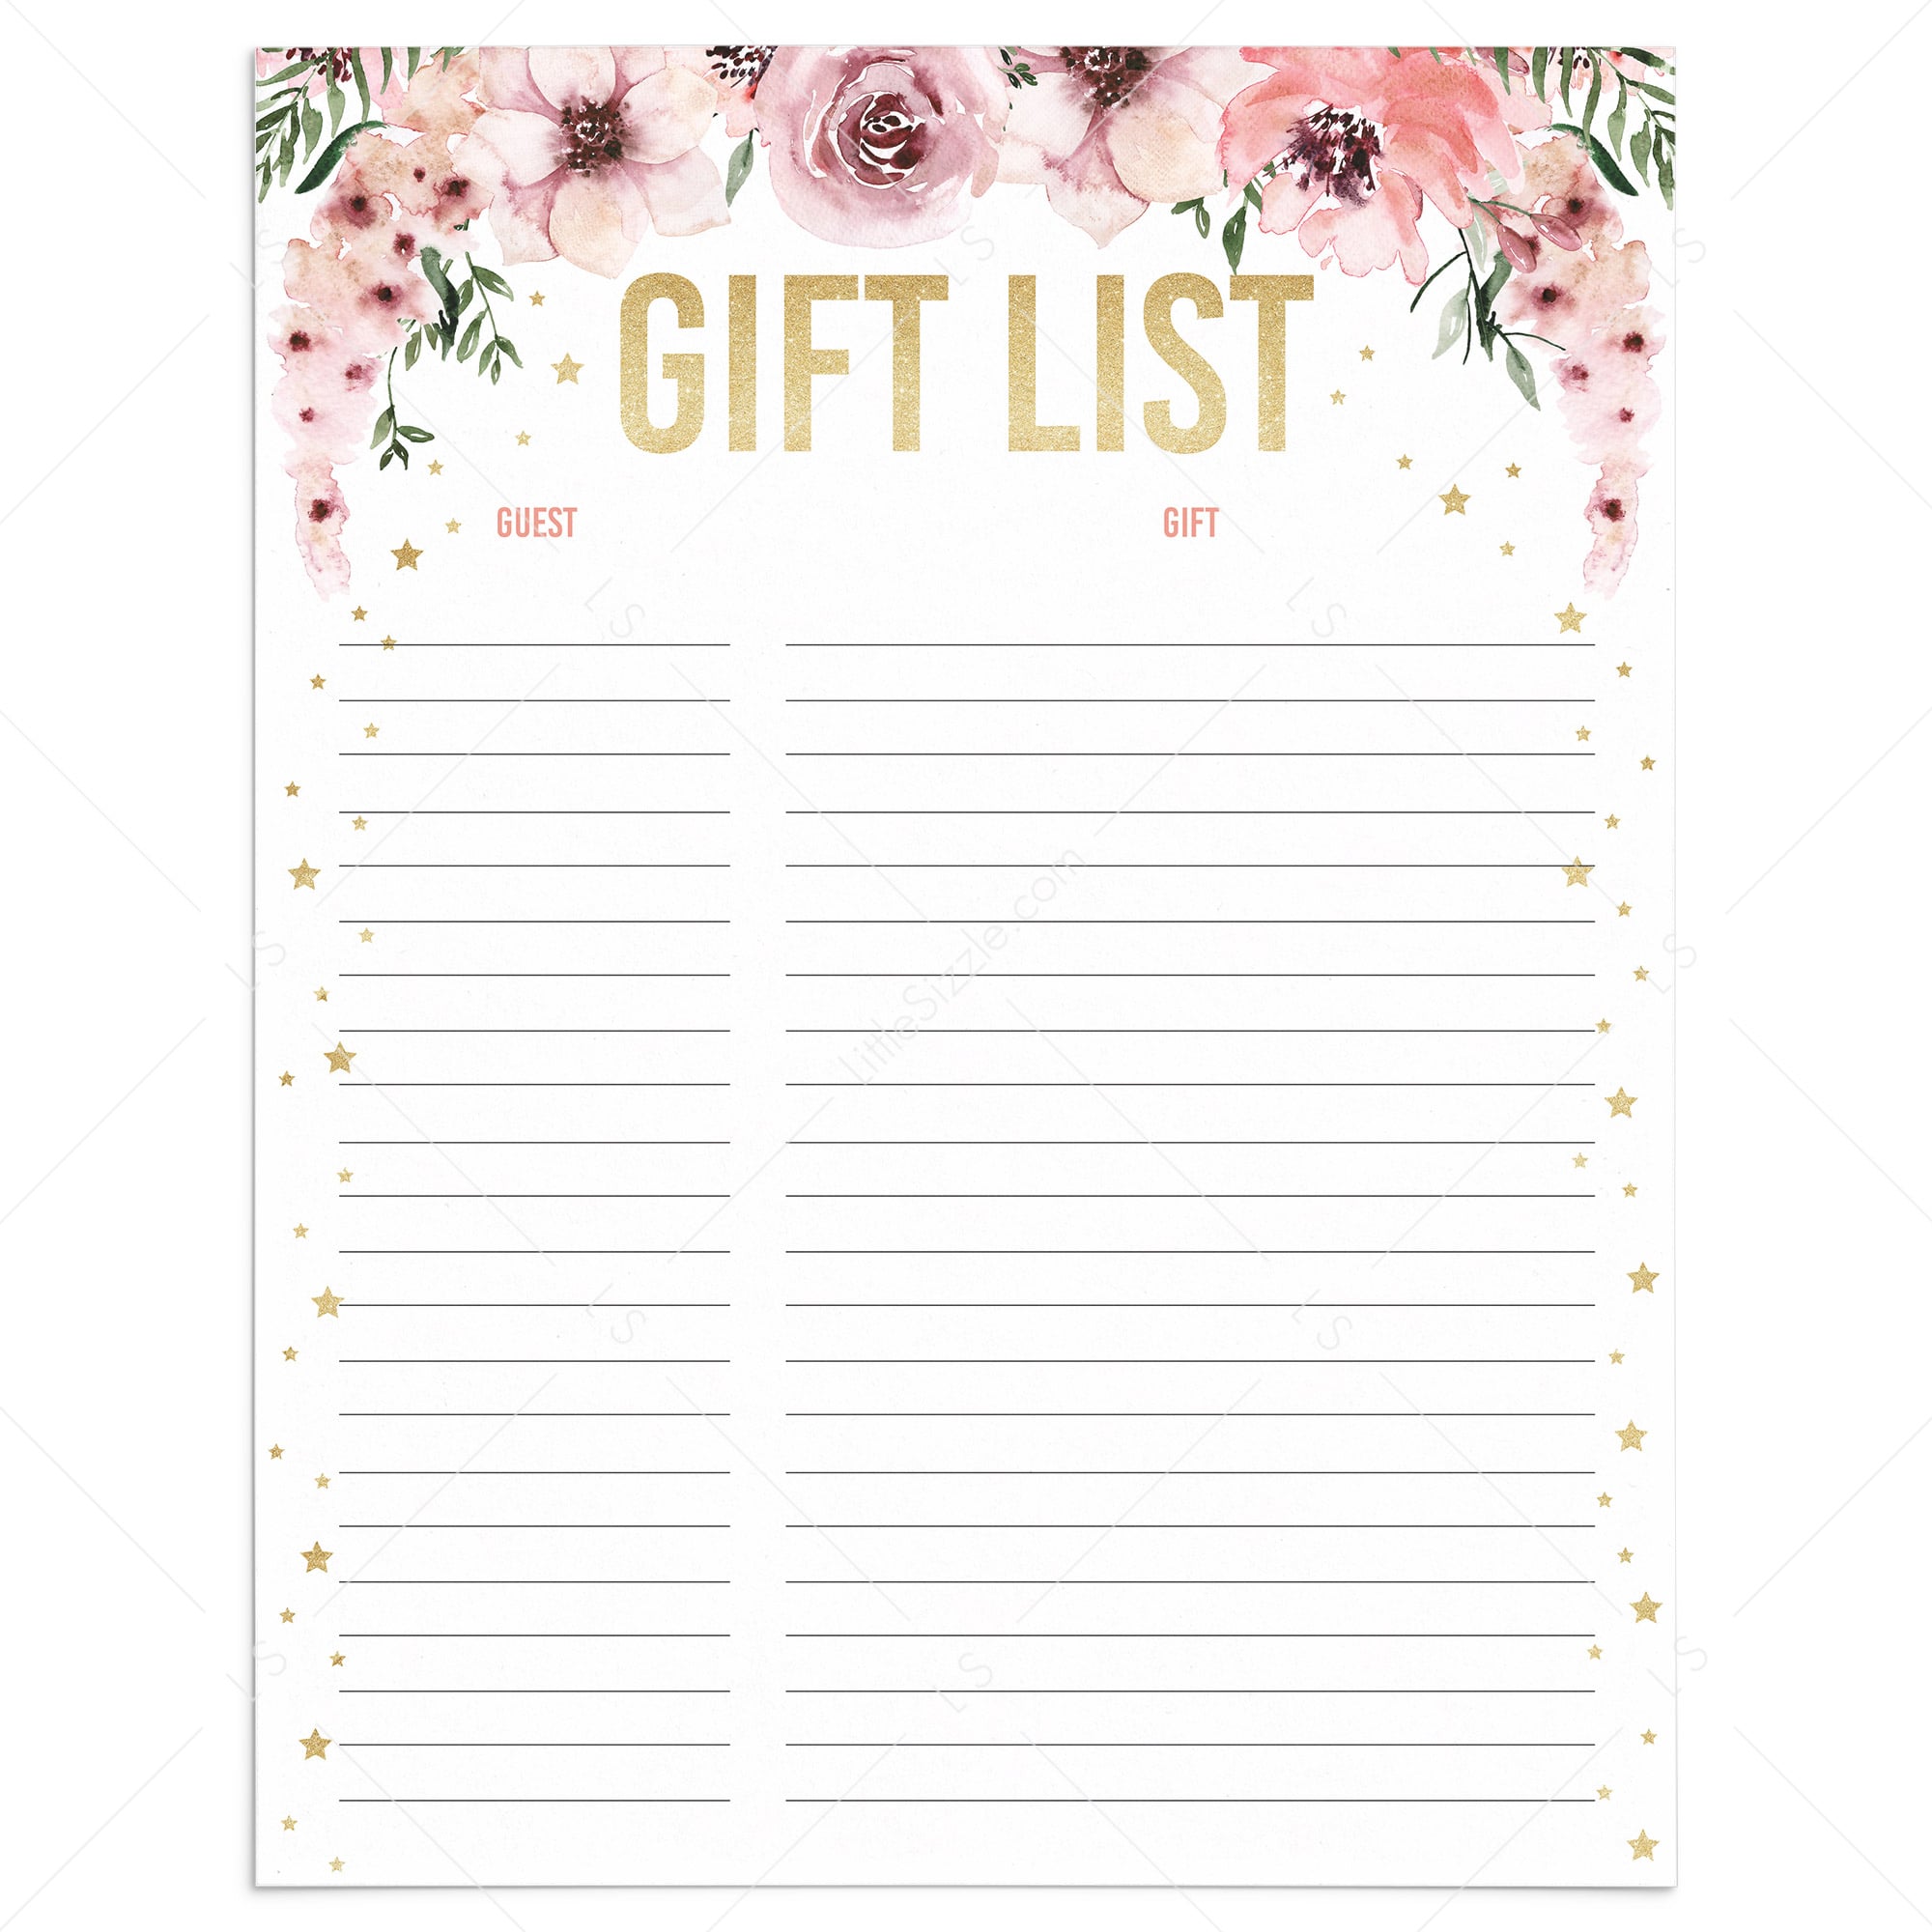 Gift and guest tracker printable with pink flowers by LittleSizzle